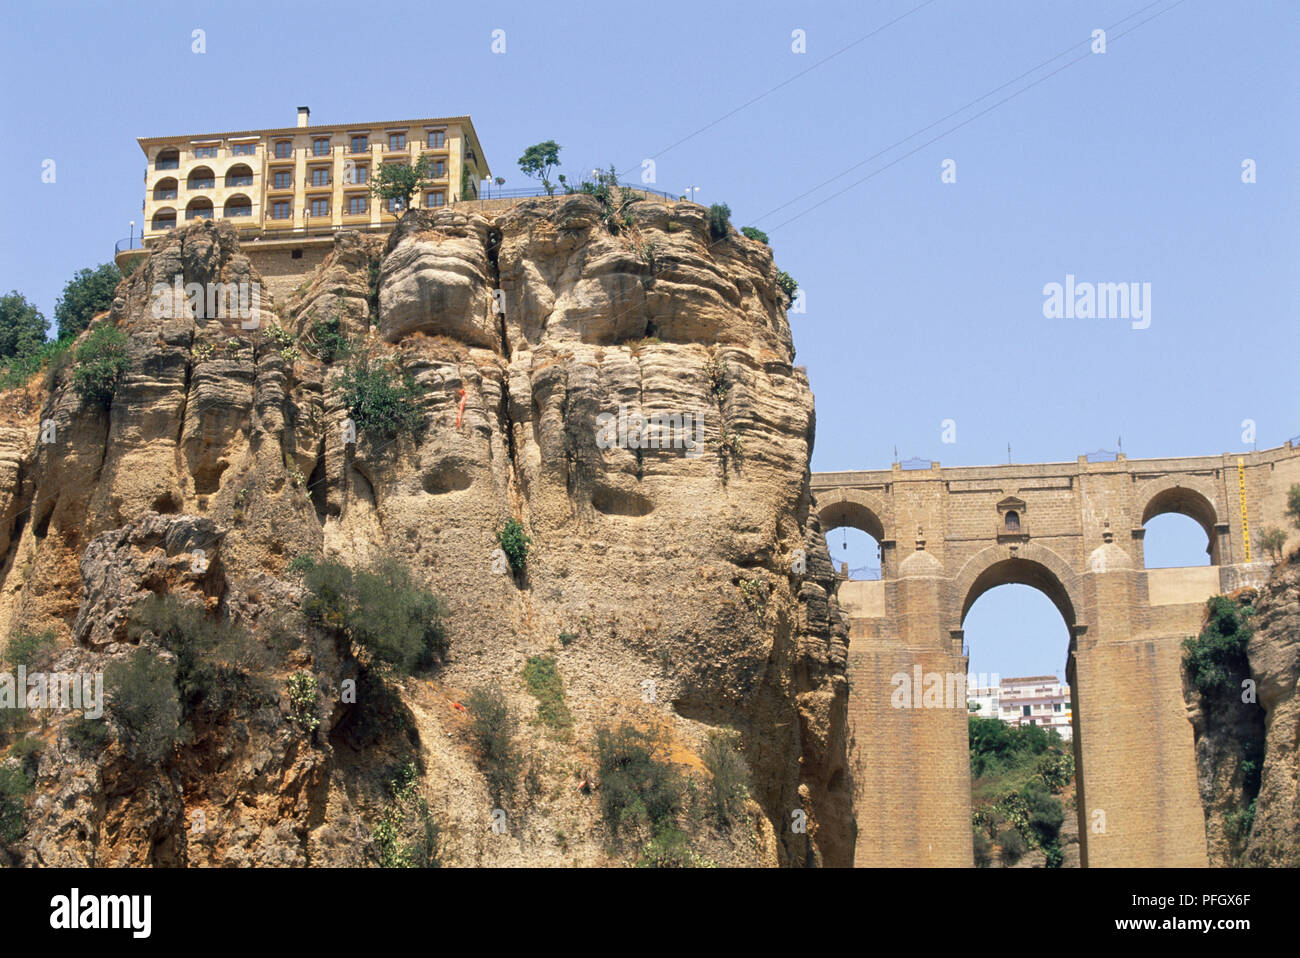 Spain, Andalusia, eighteenth century bridge, Puente Nuevo, over a gorge to a town on rock. Stock Photo